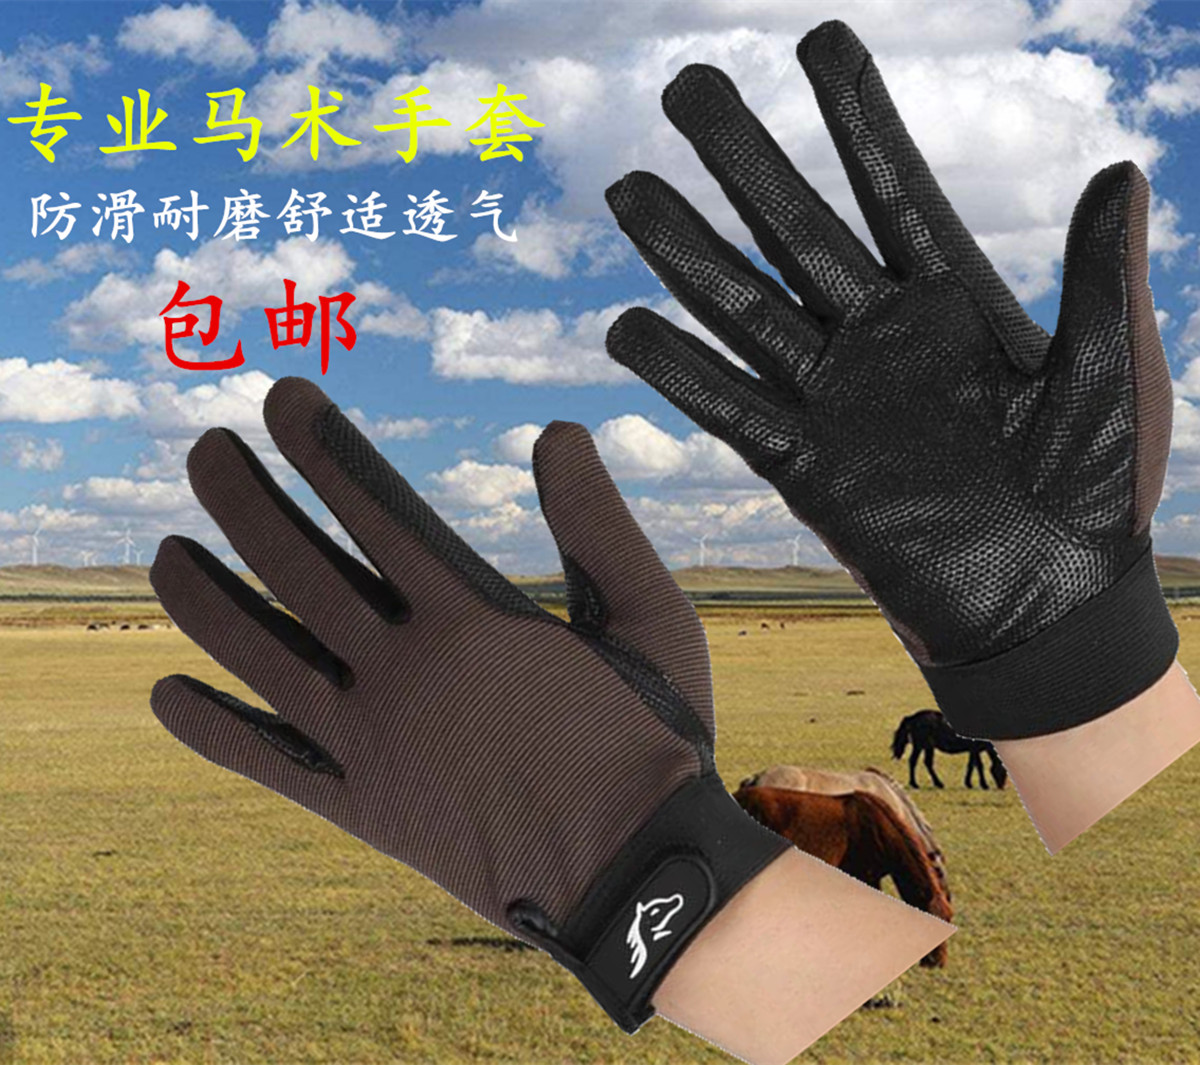 Equestrian gloves Professional riding gloves abrasion resistant anti-slip gloves Cavaliers equestrian equipment equestrian items